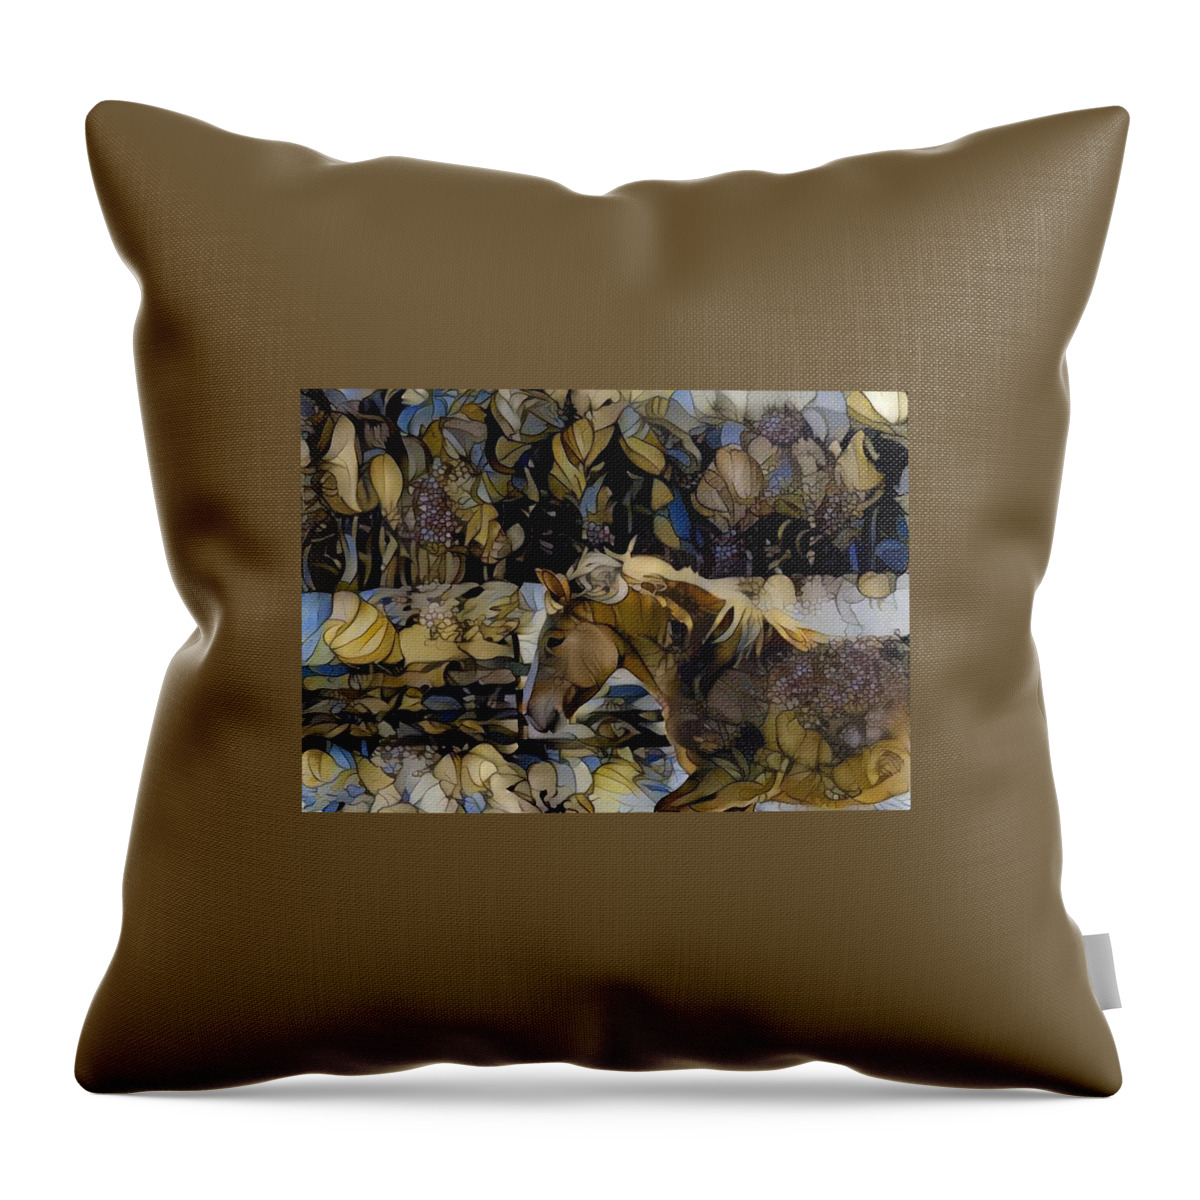 Palomino Throw Pillow featuring the digital art Young Prince 2 by Listen To Your Horse